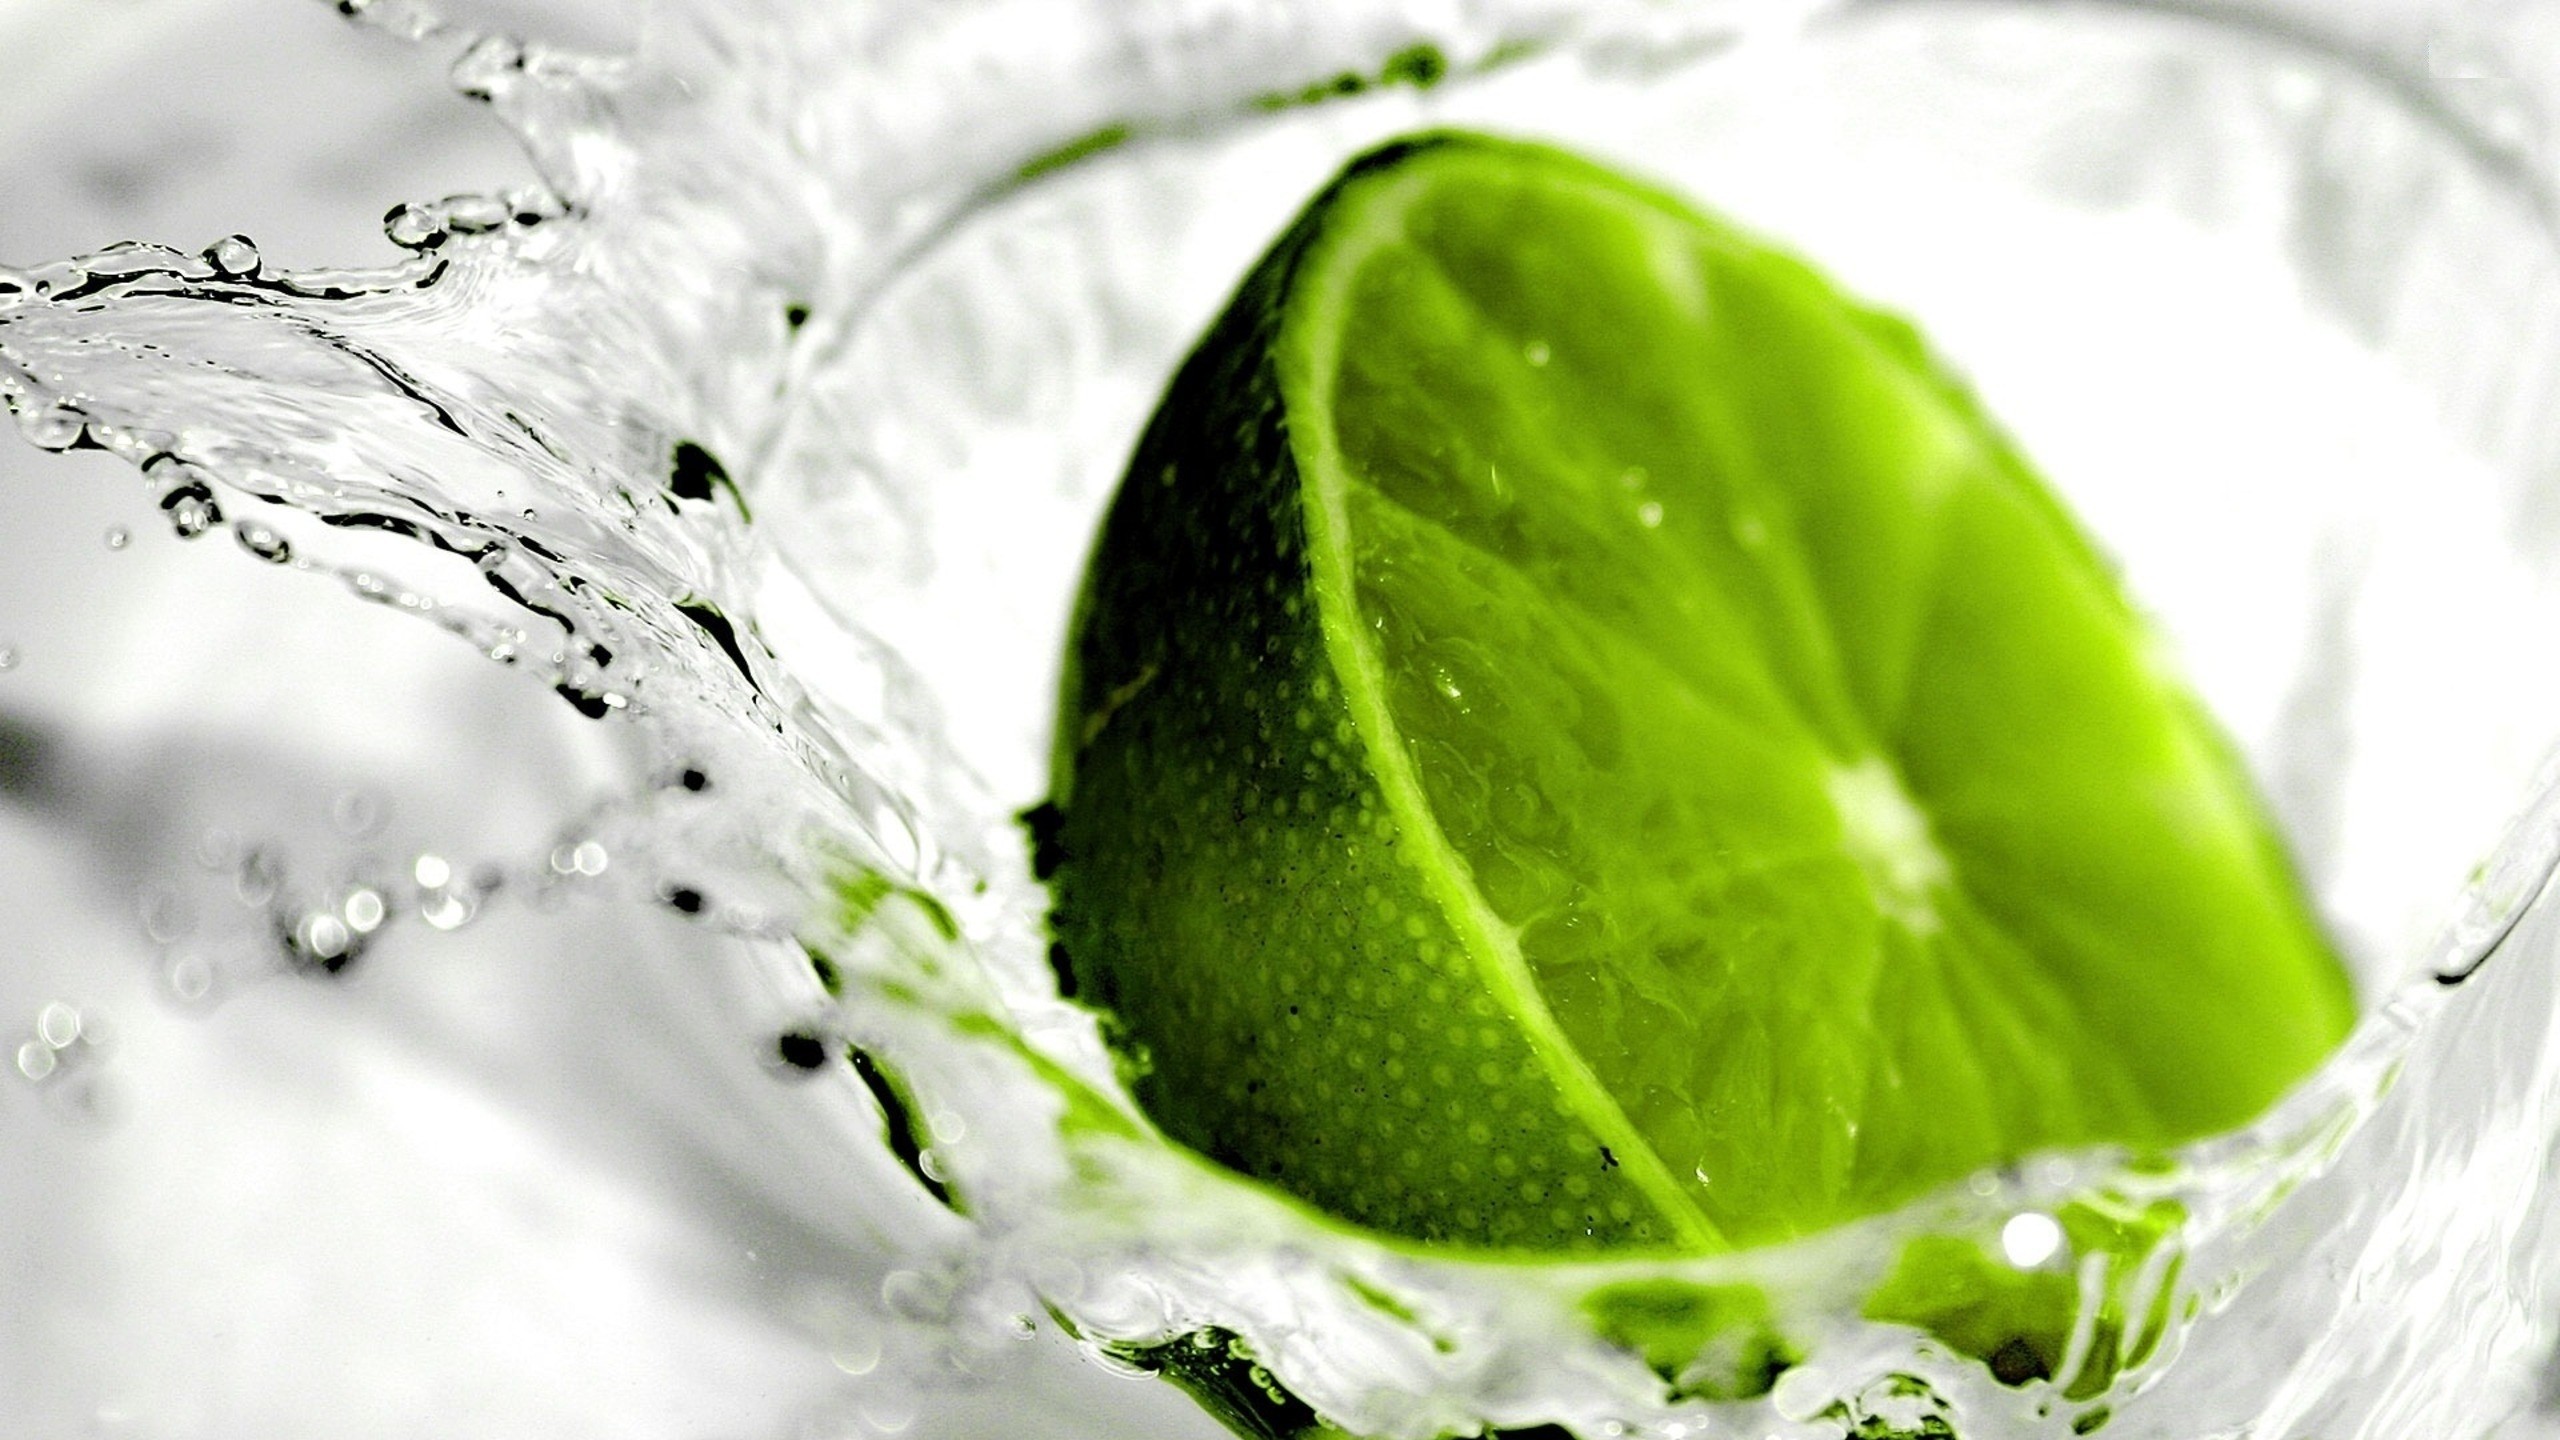 Limes Fruit Water 2560x1440